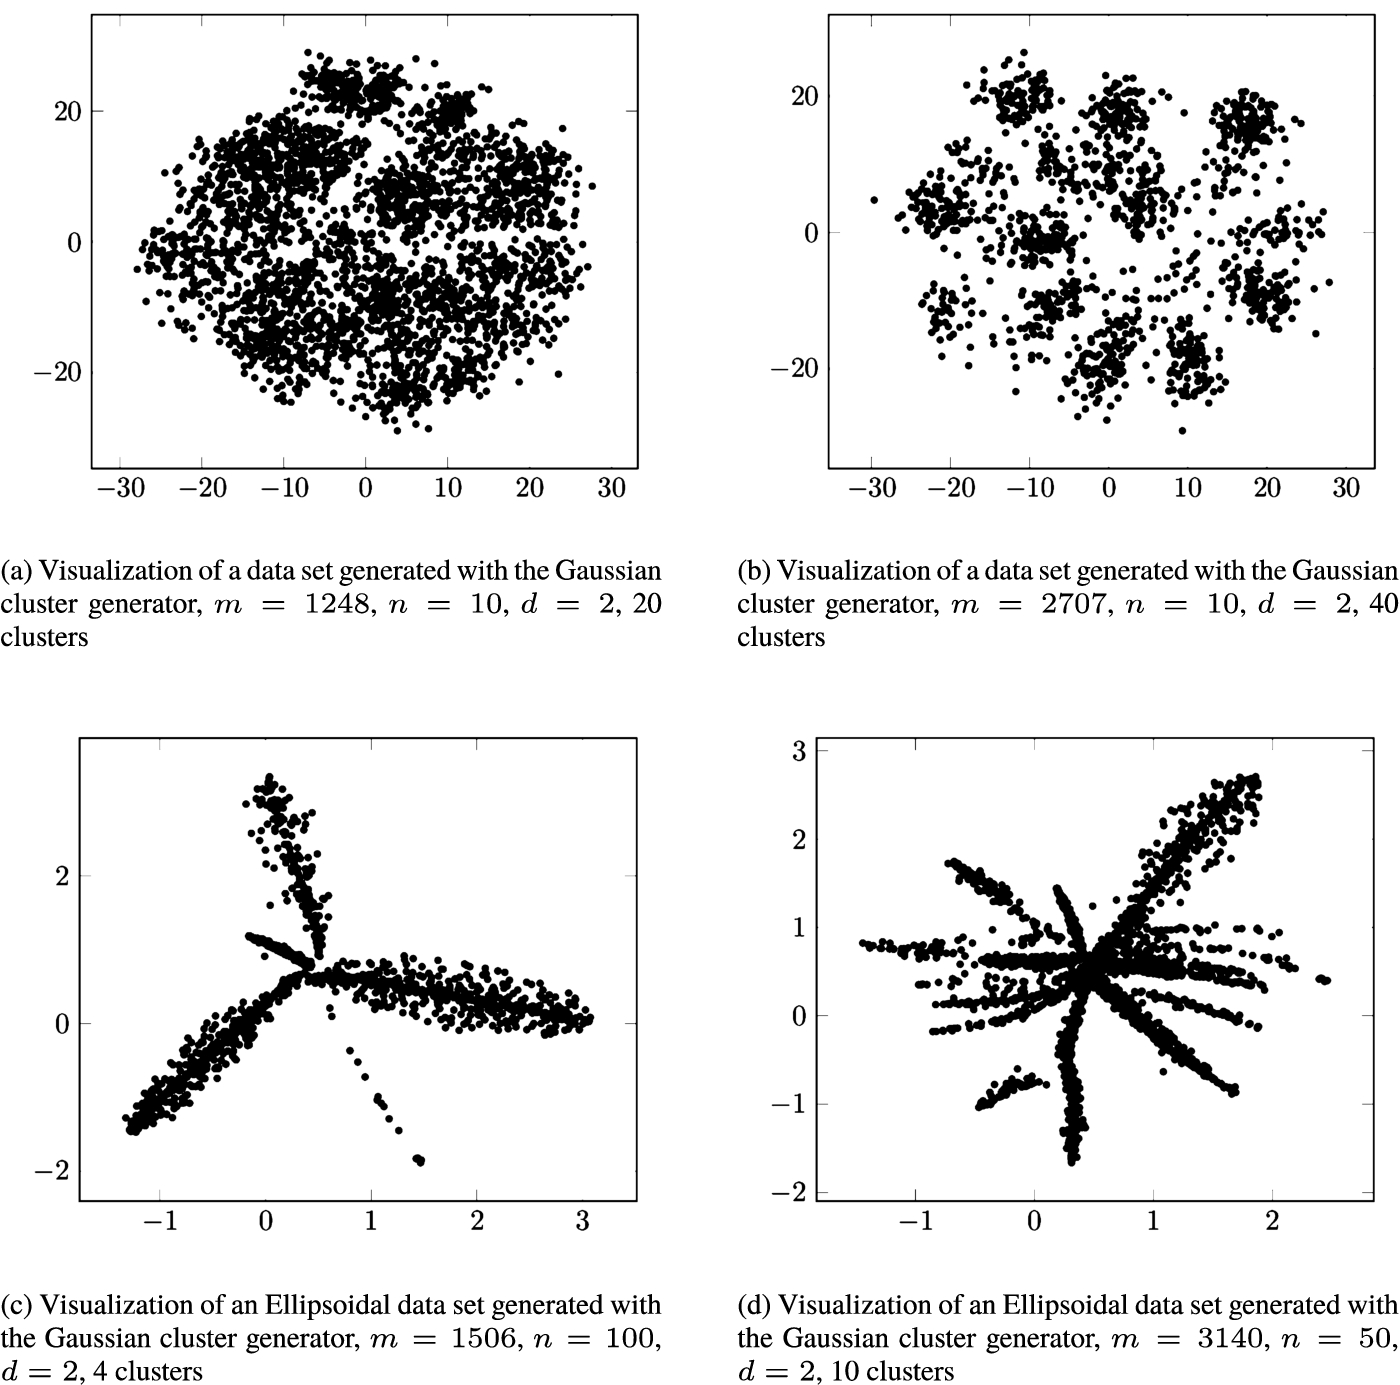 Examples of dimensionality reduction results obtained using Geometric MDS.